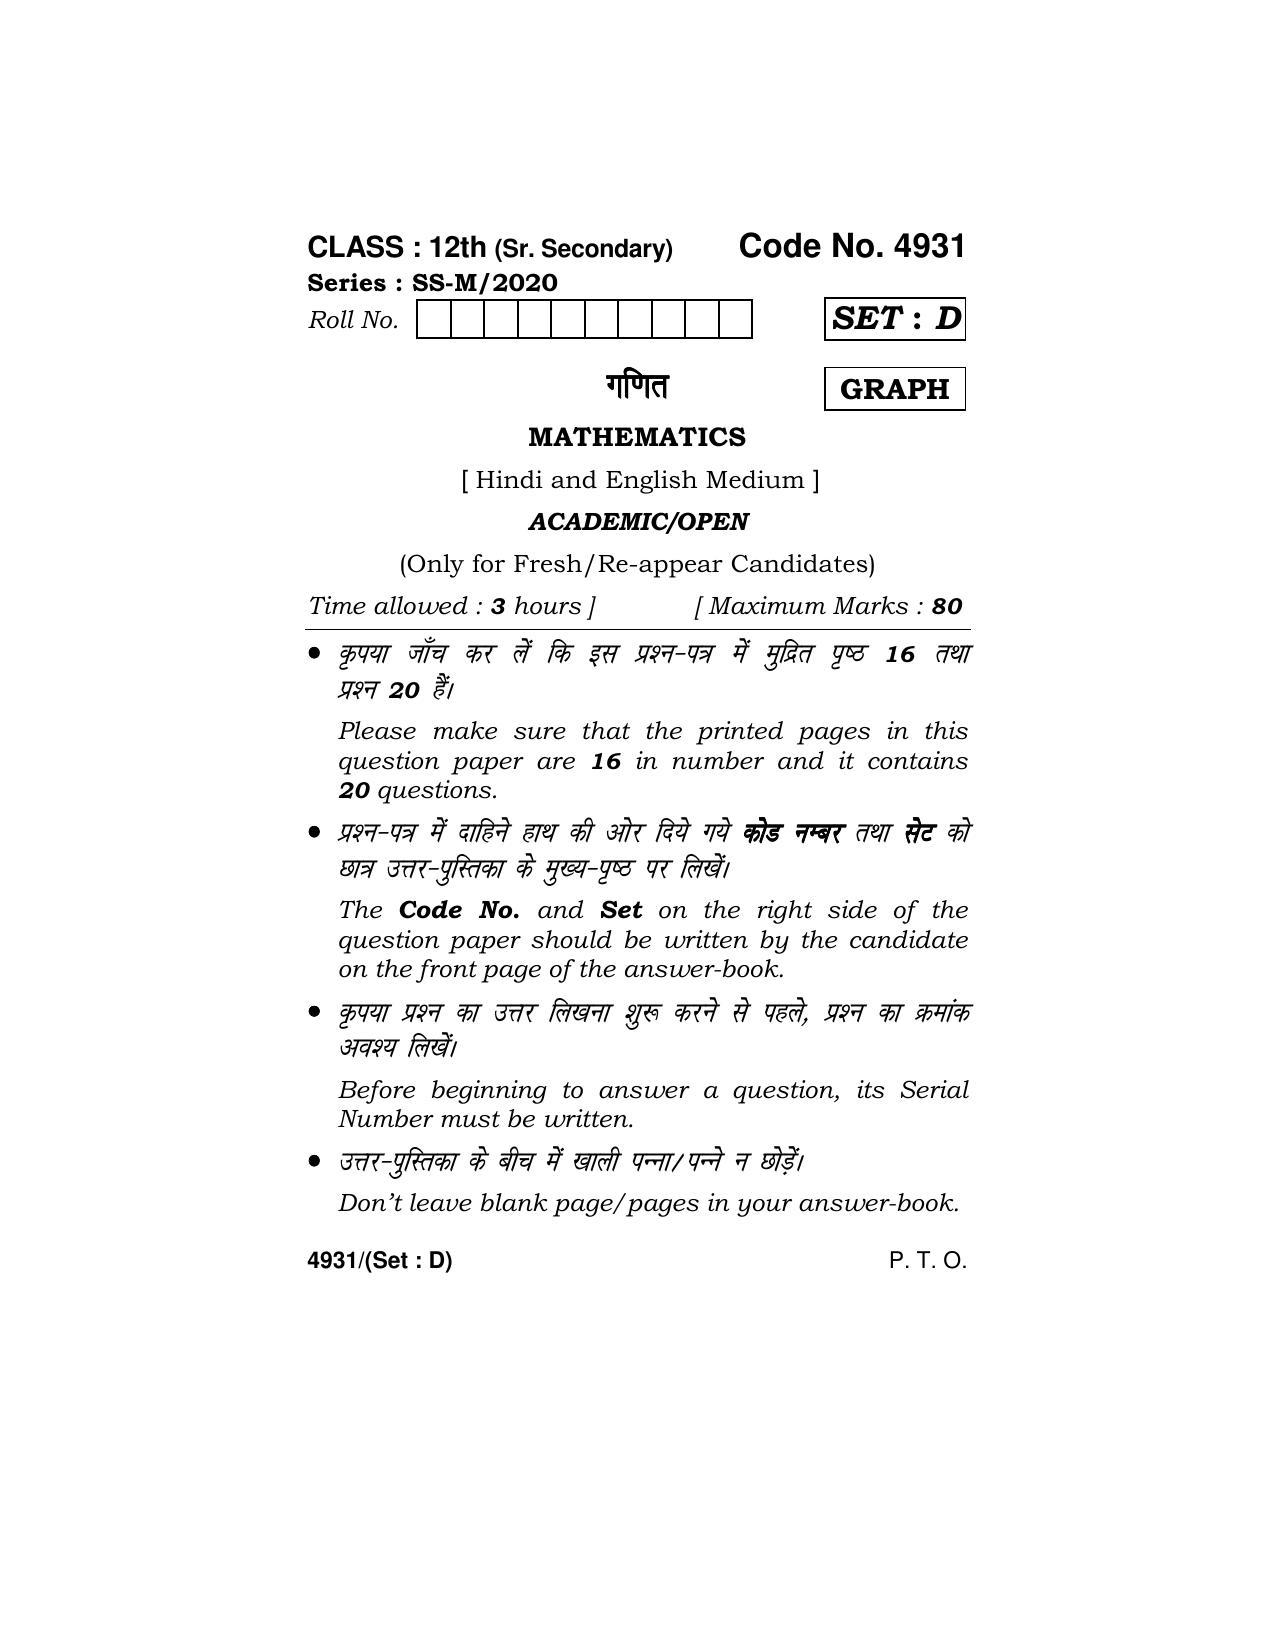 Haryana Board HBSE Class 12 Mathematics 2020 Question Paper - Page 49